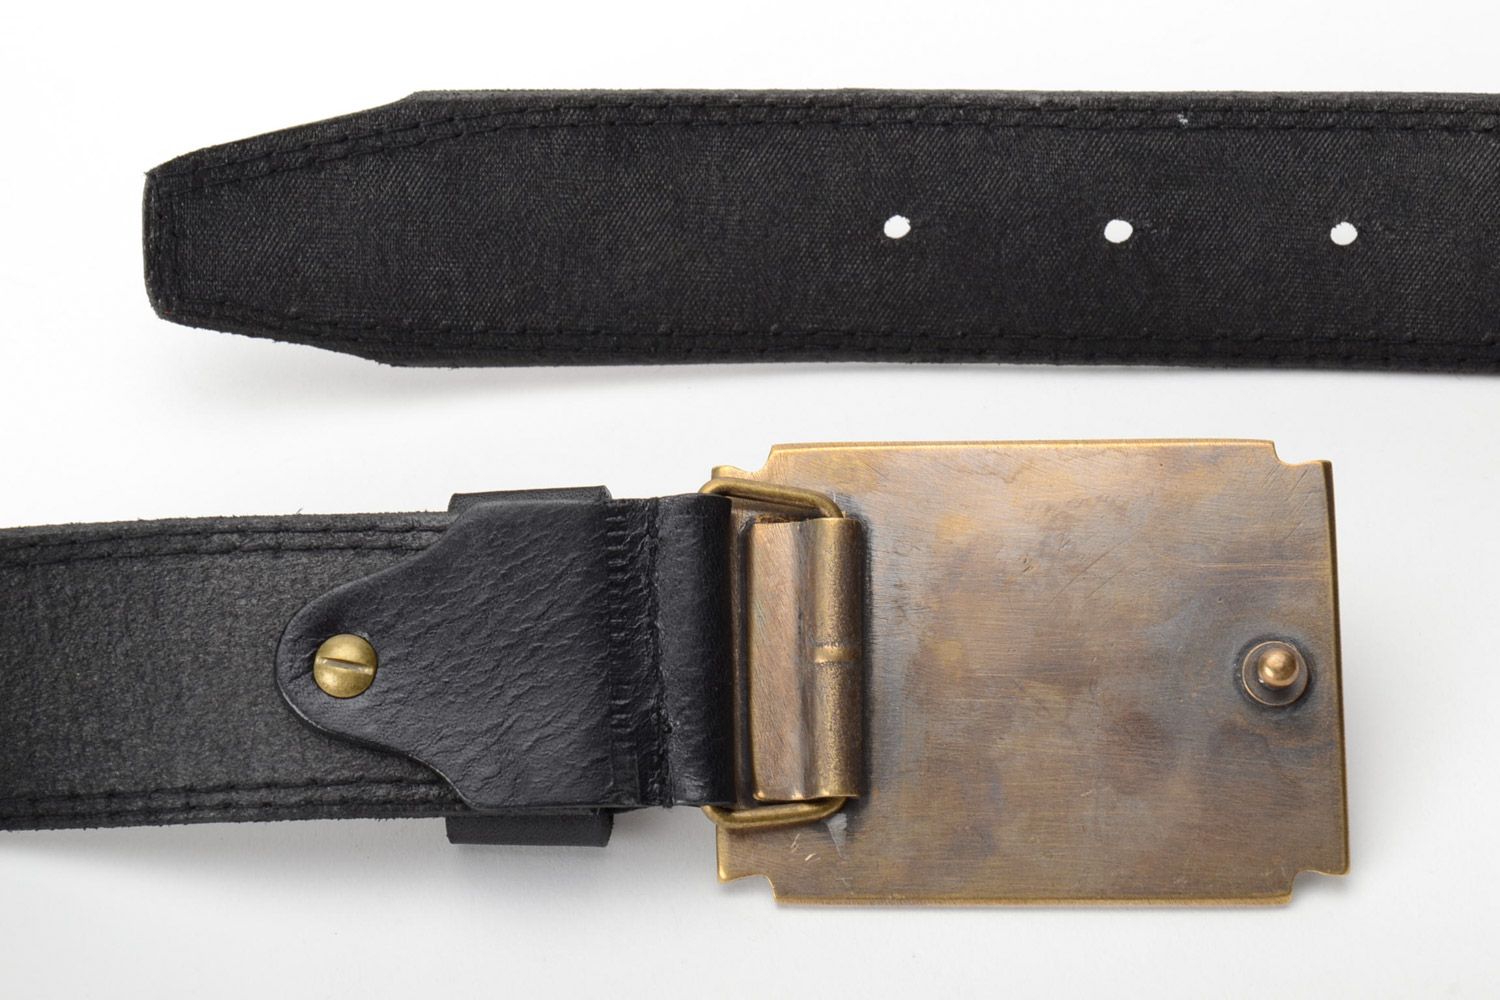 Homemade genuine leather belt with metal buckle and embossment in the shape of skull photo 3